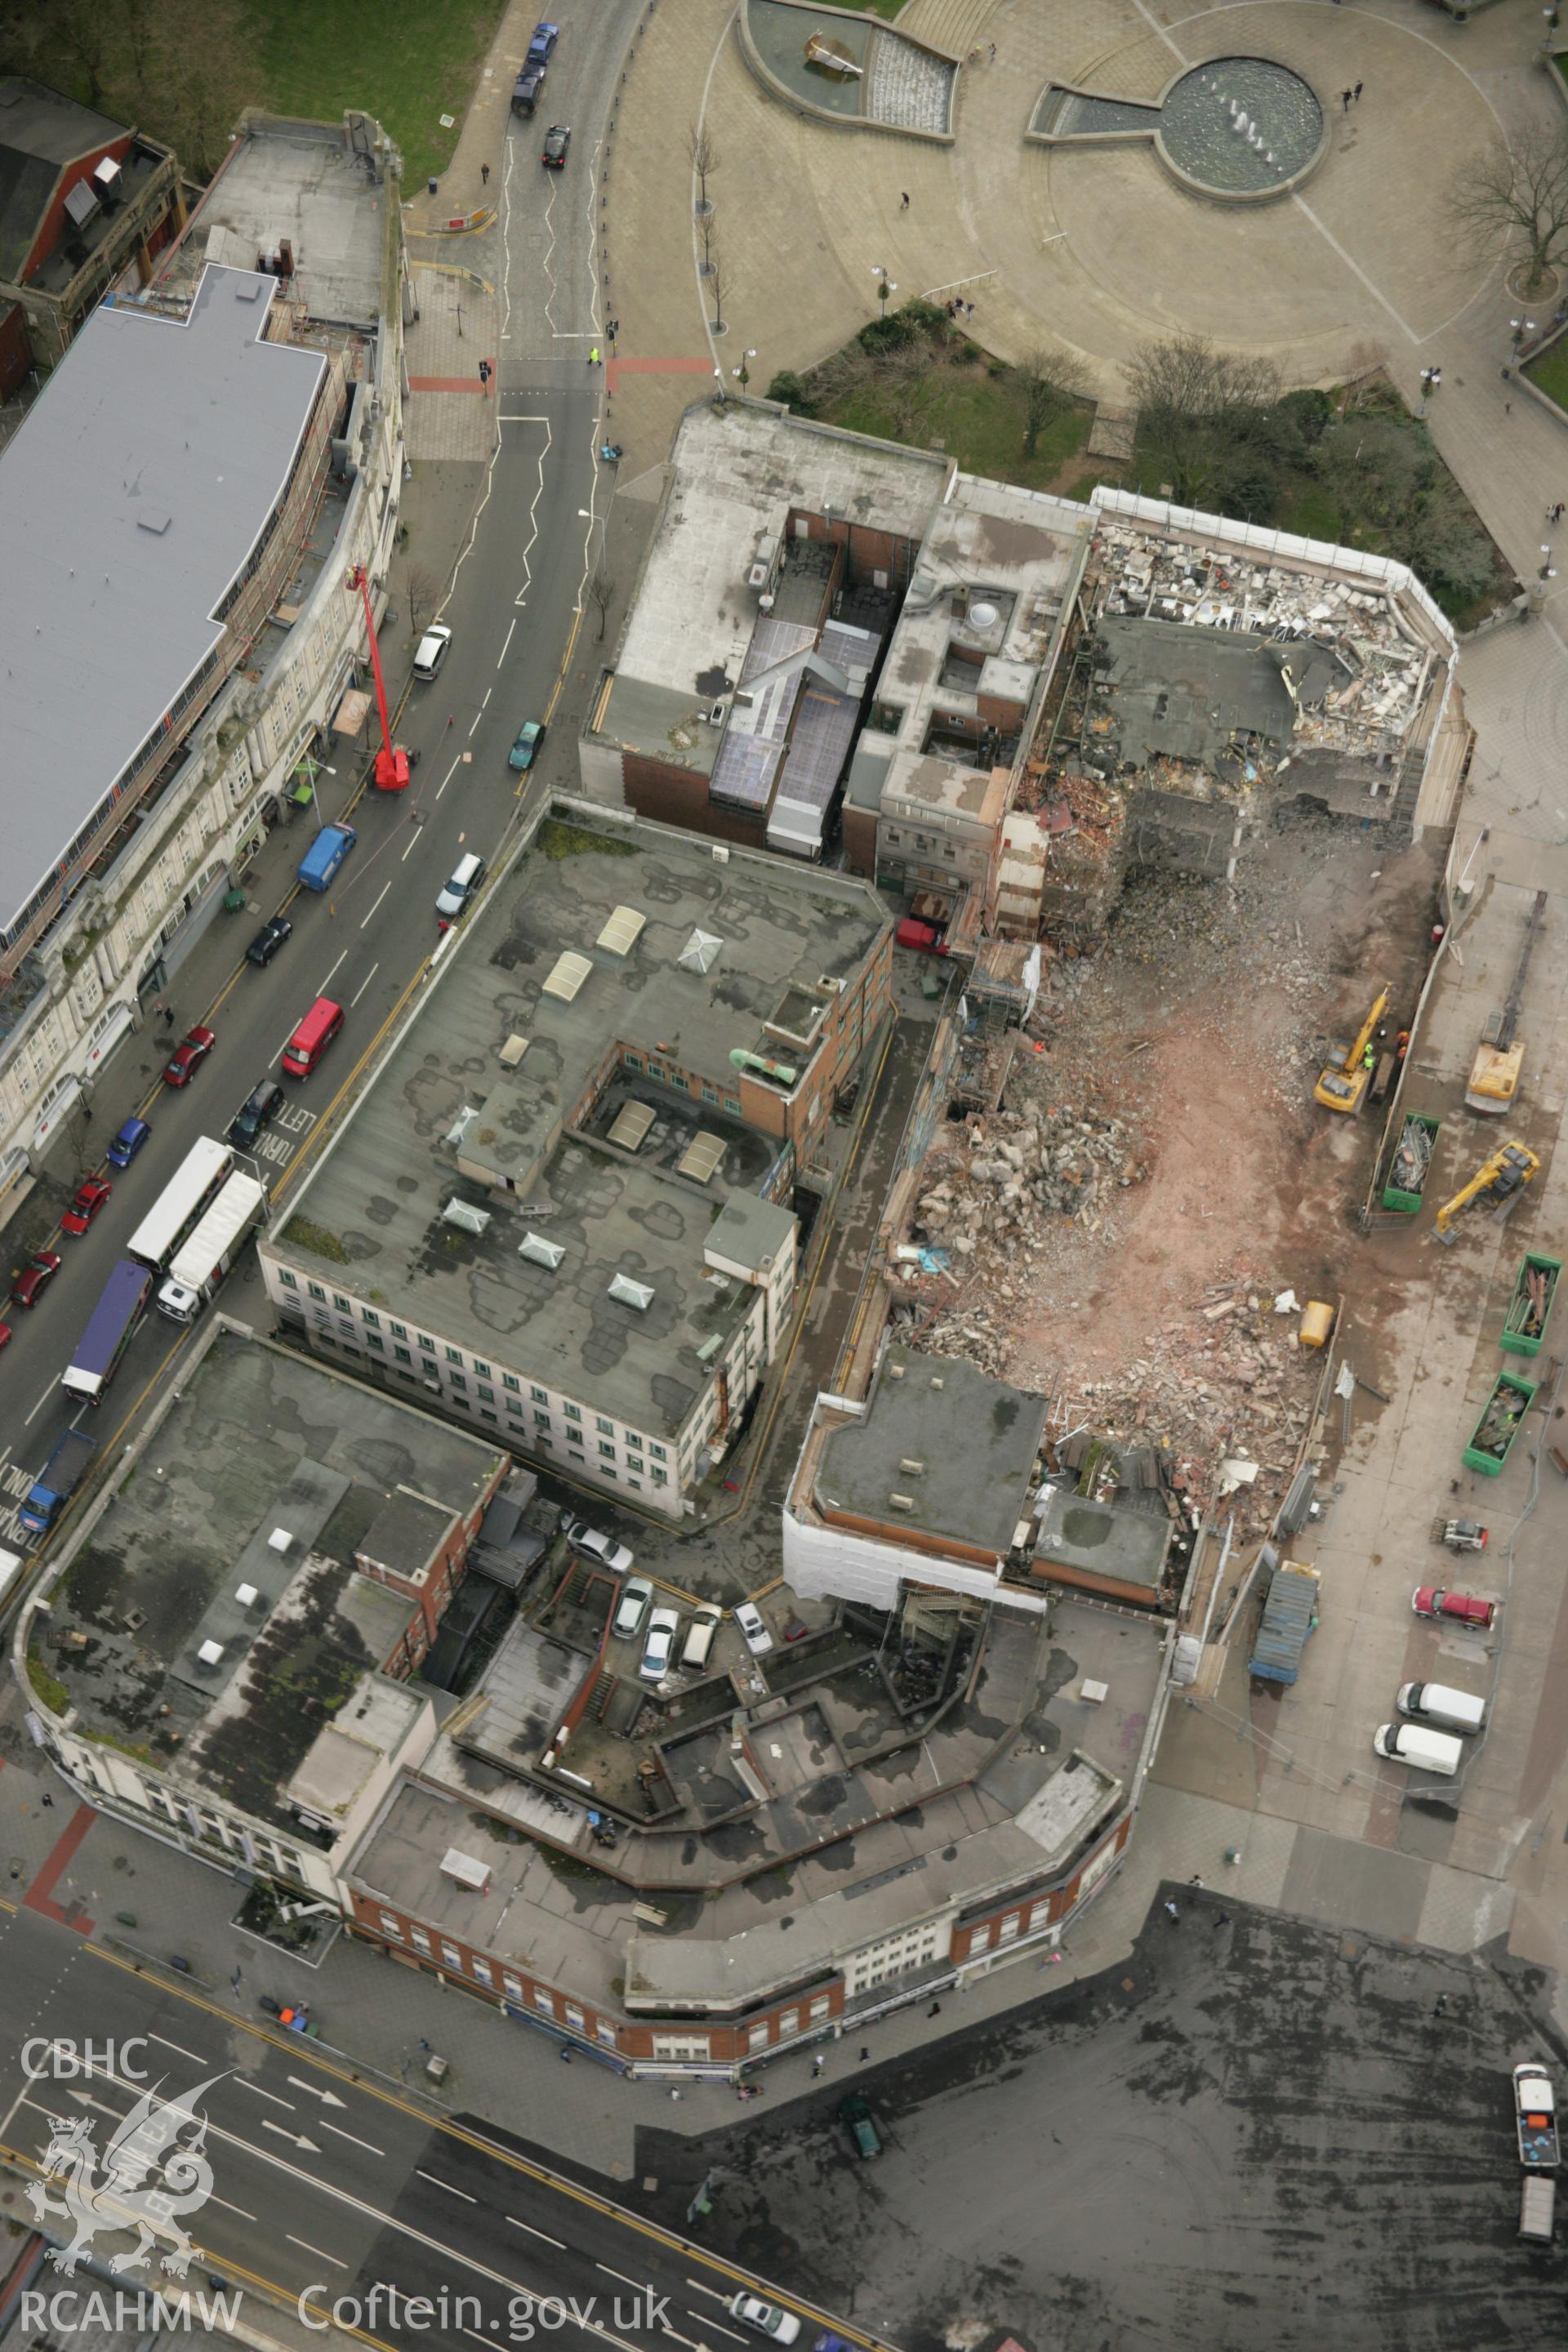 RCAHMW colour oblique aerial photograph of Swansea showing demolition work near the Kingsway Roundabout. Taken on 16 March 2007 by Toby Driver